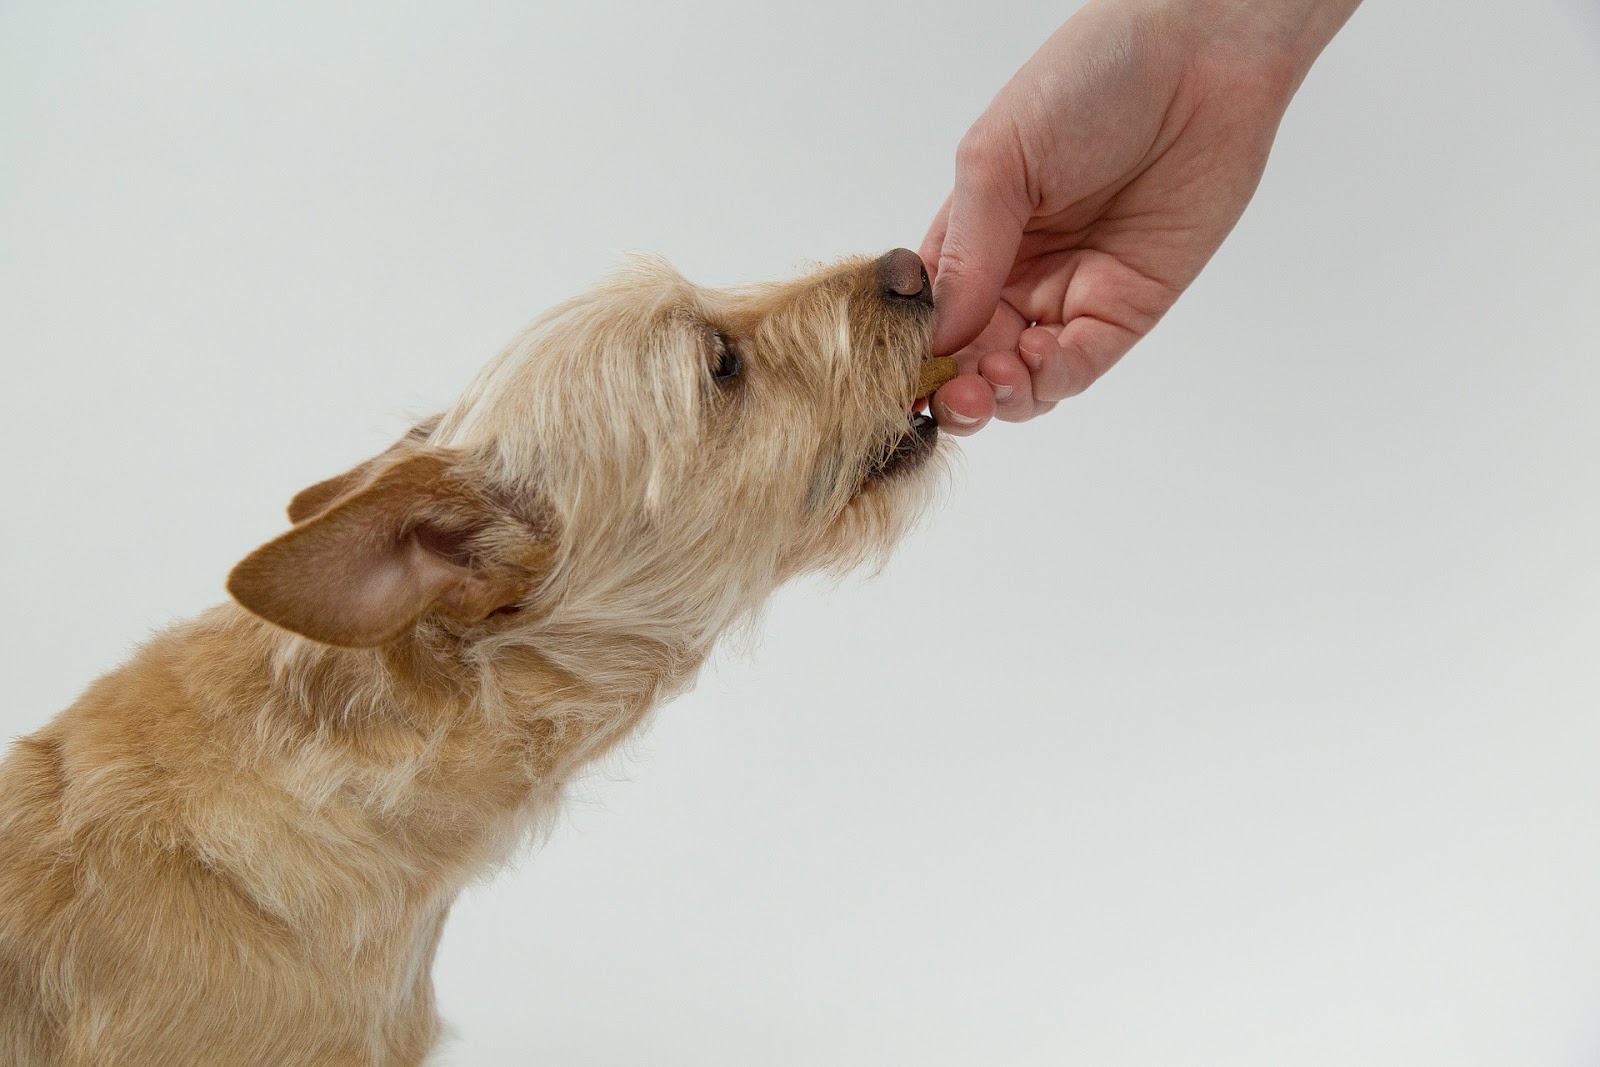 Want to Improve Your Dog's Health? Change Their Diet!